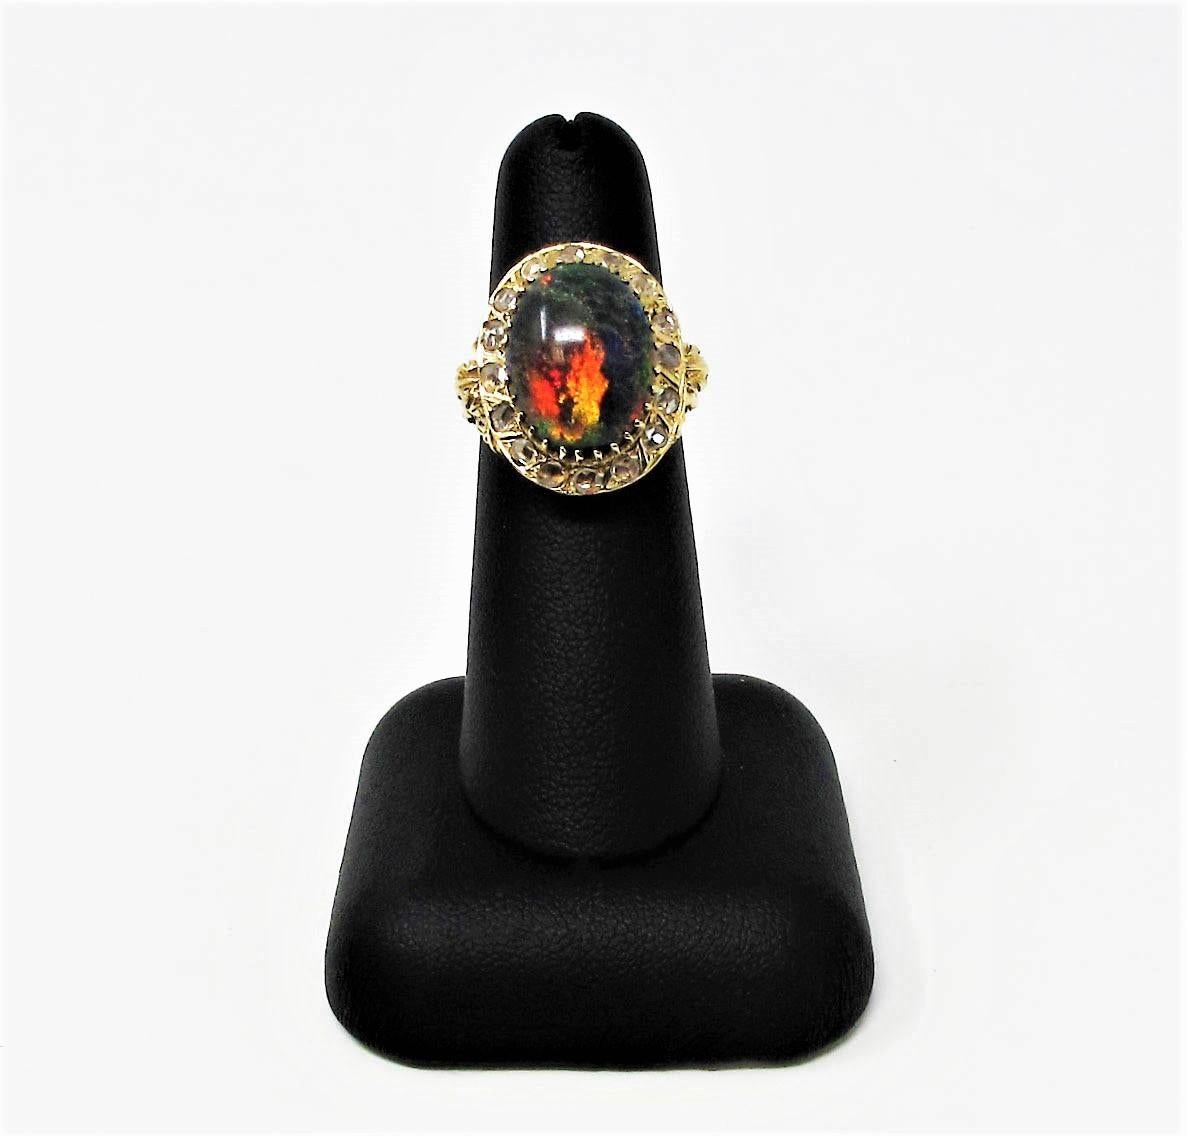 Truly incredible black opal and diamond cocktail ring with bold, vibrant colors. This rare, vintage piece is a visual showstopper with its iridescent play-of-color and sparking diamonds, while the ornately carved gold shank adds to the charm of this